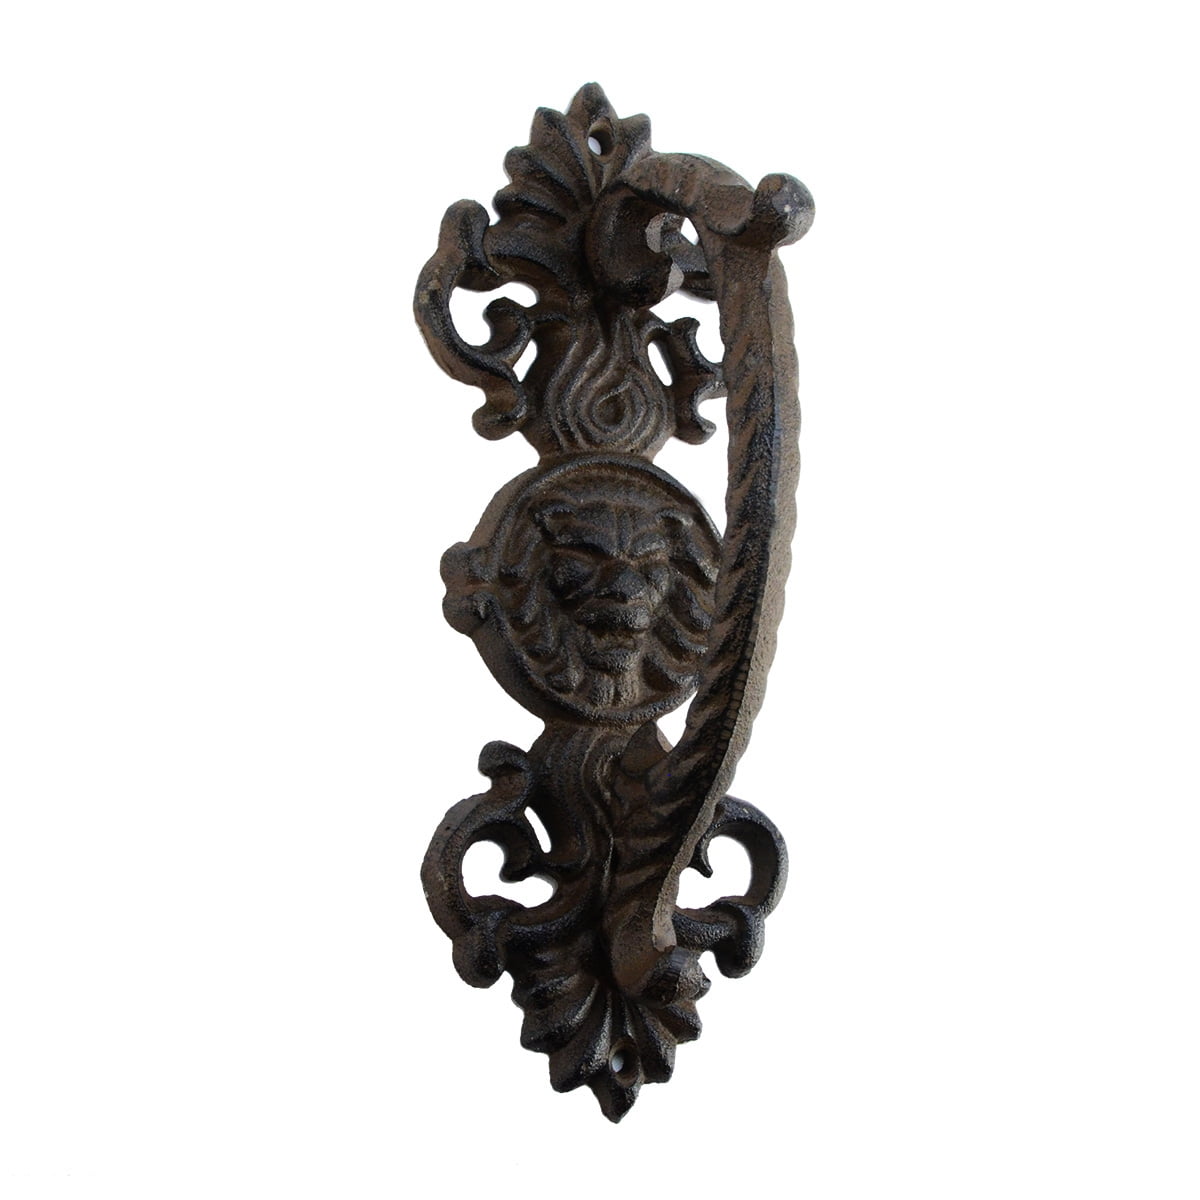 SET OF 2 ORNATE WROUGHT IRON LIONS HEAD DOOR GATE ENTRY PULL HANDLES  9 1/4" 